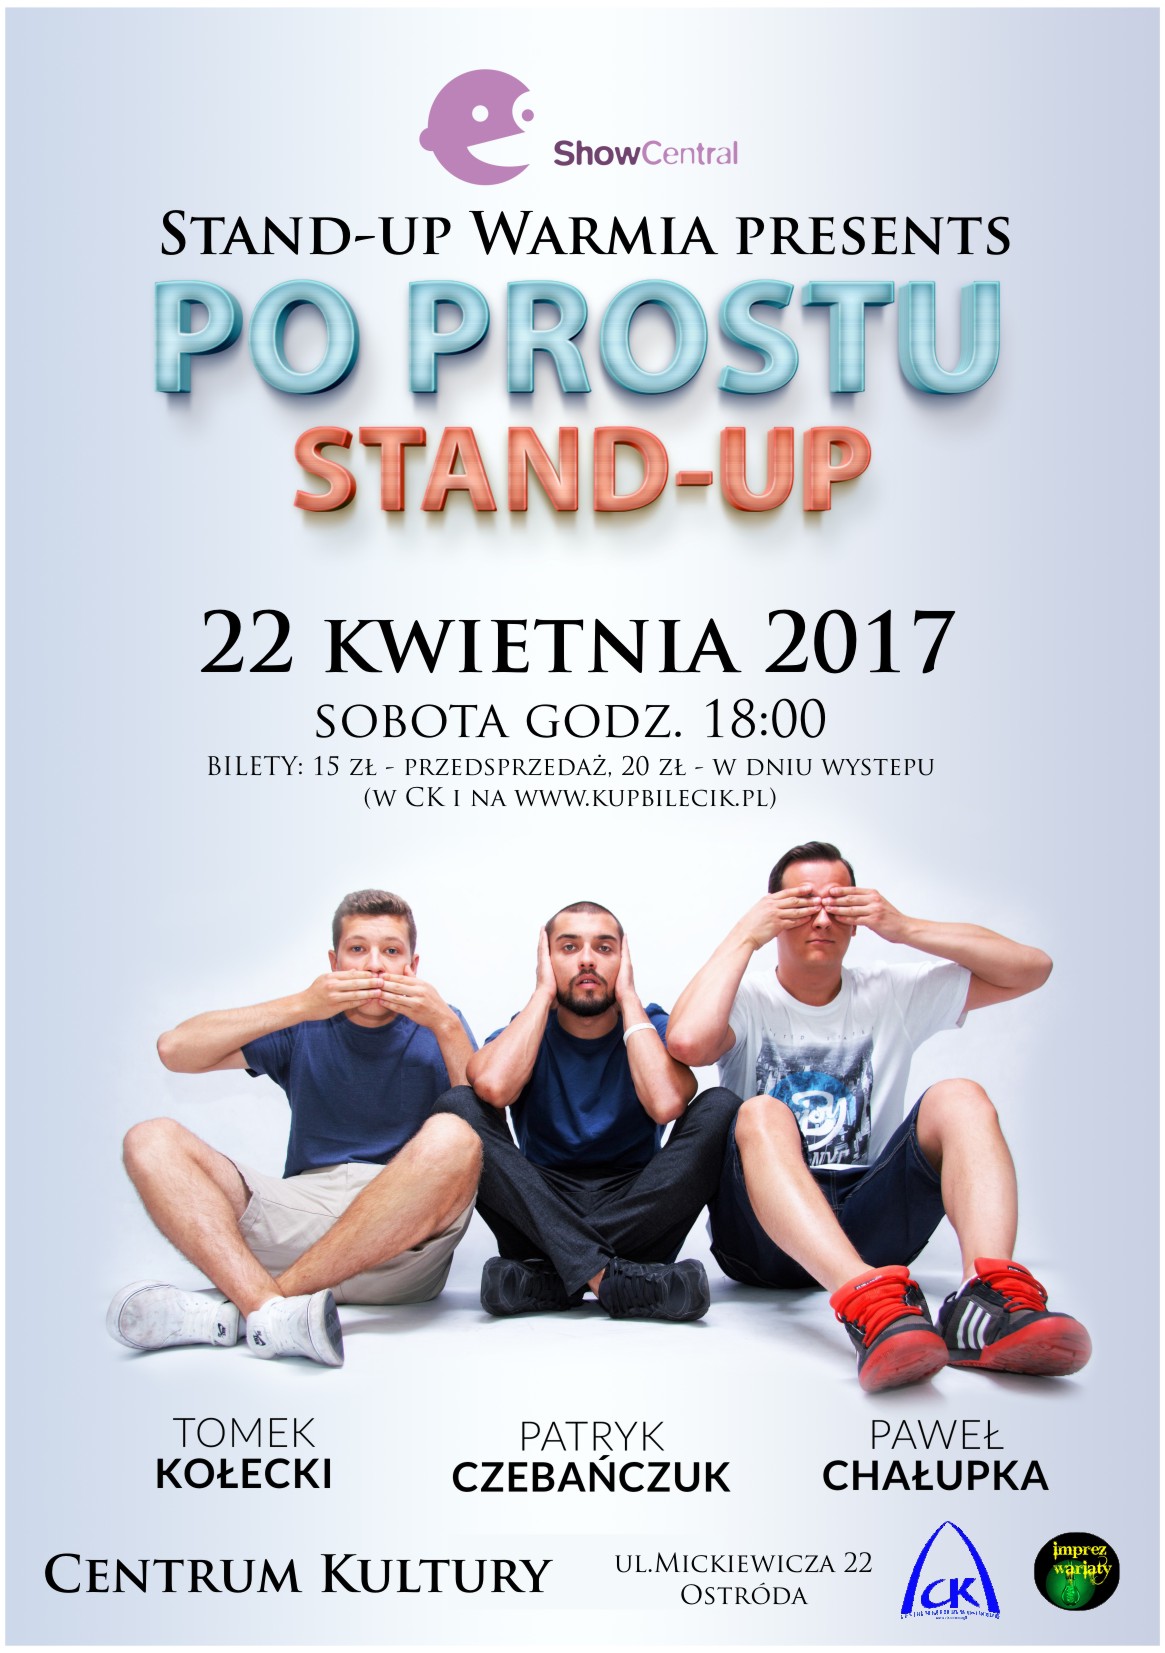 Stand-up Warmia Presents